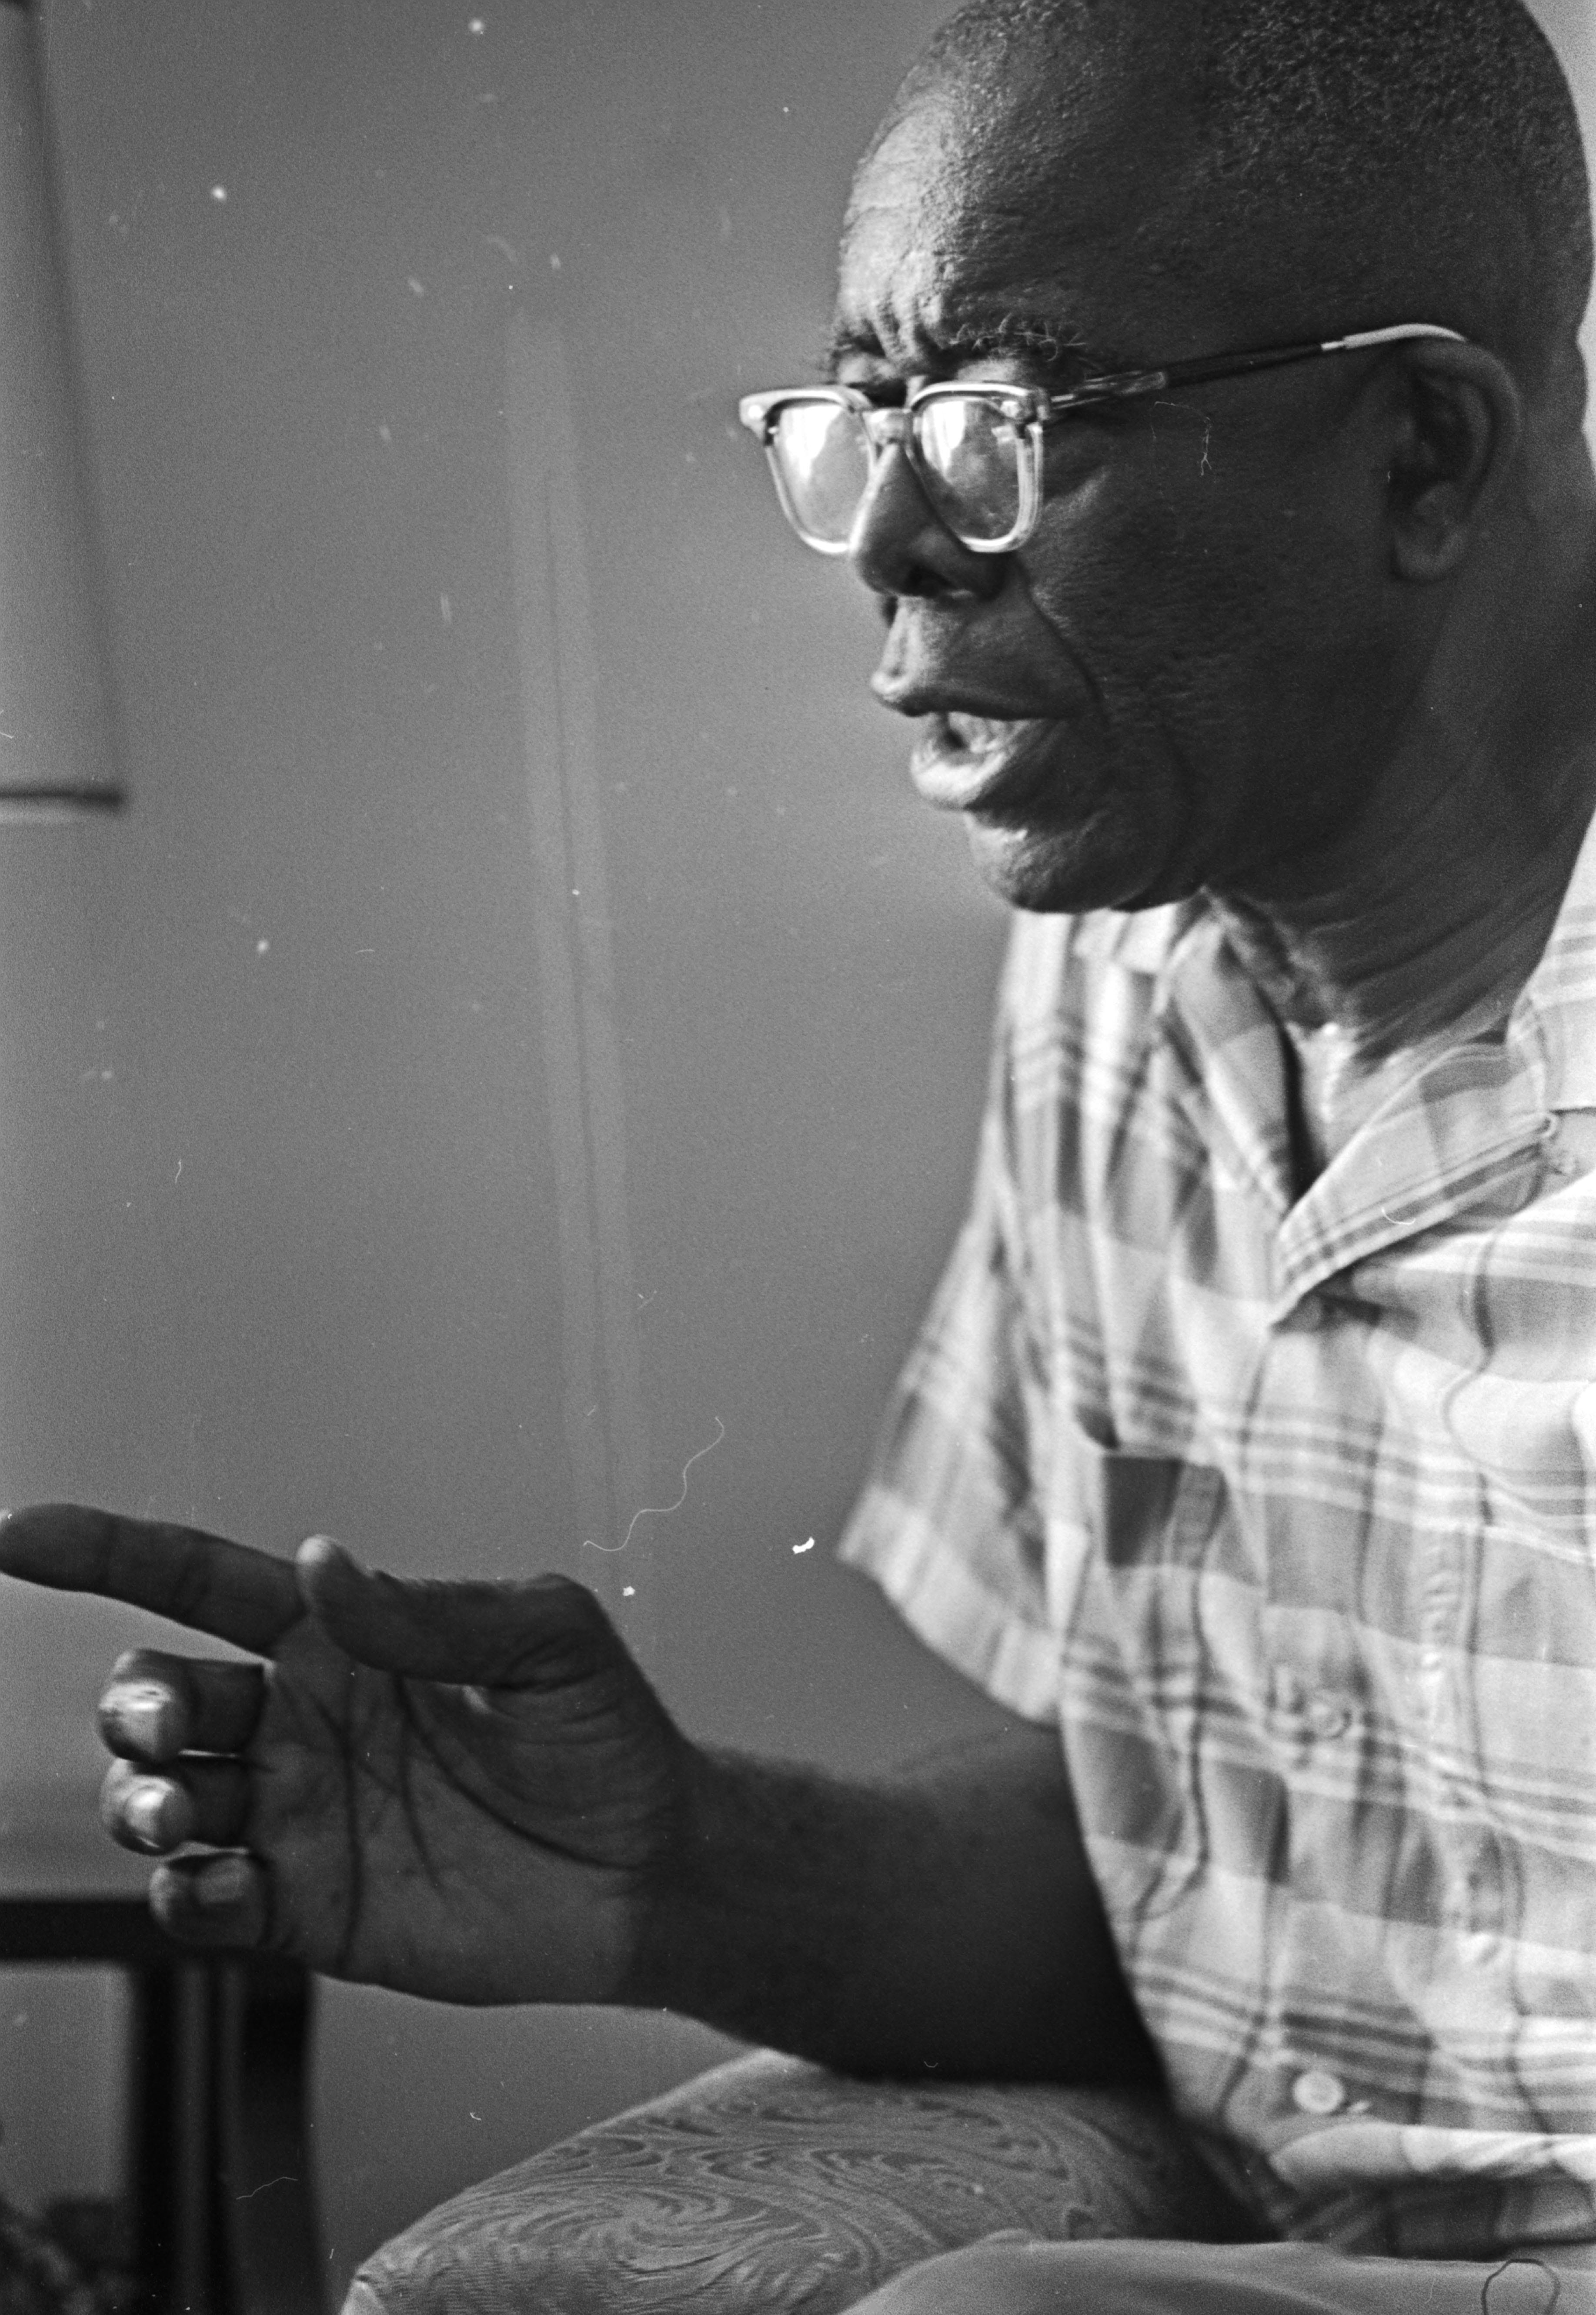 E.D. Nixon (seen here in 1965) was a civil rights activist in Montgomery for decades. In 1943 and 1944, he worked with Arthur Madison to register Black voters. Nixon later served as president of the Montgomery chapter of the NAACP, and played a major role in the Montgomery Bus Boycott.